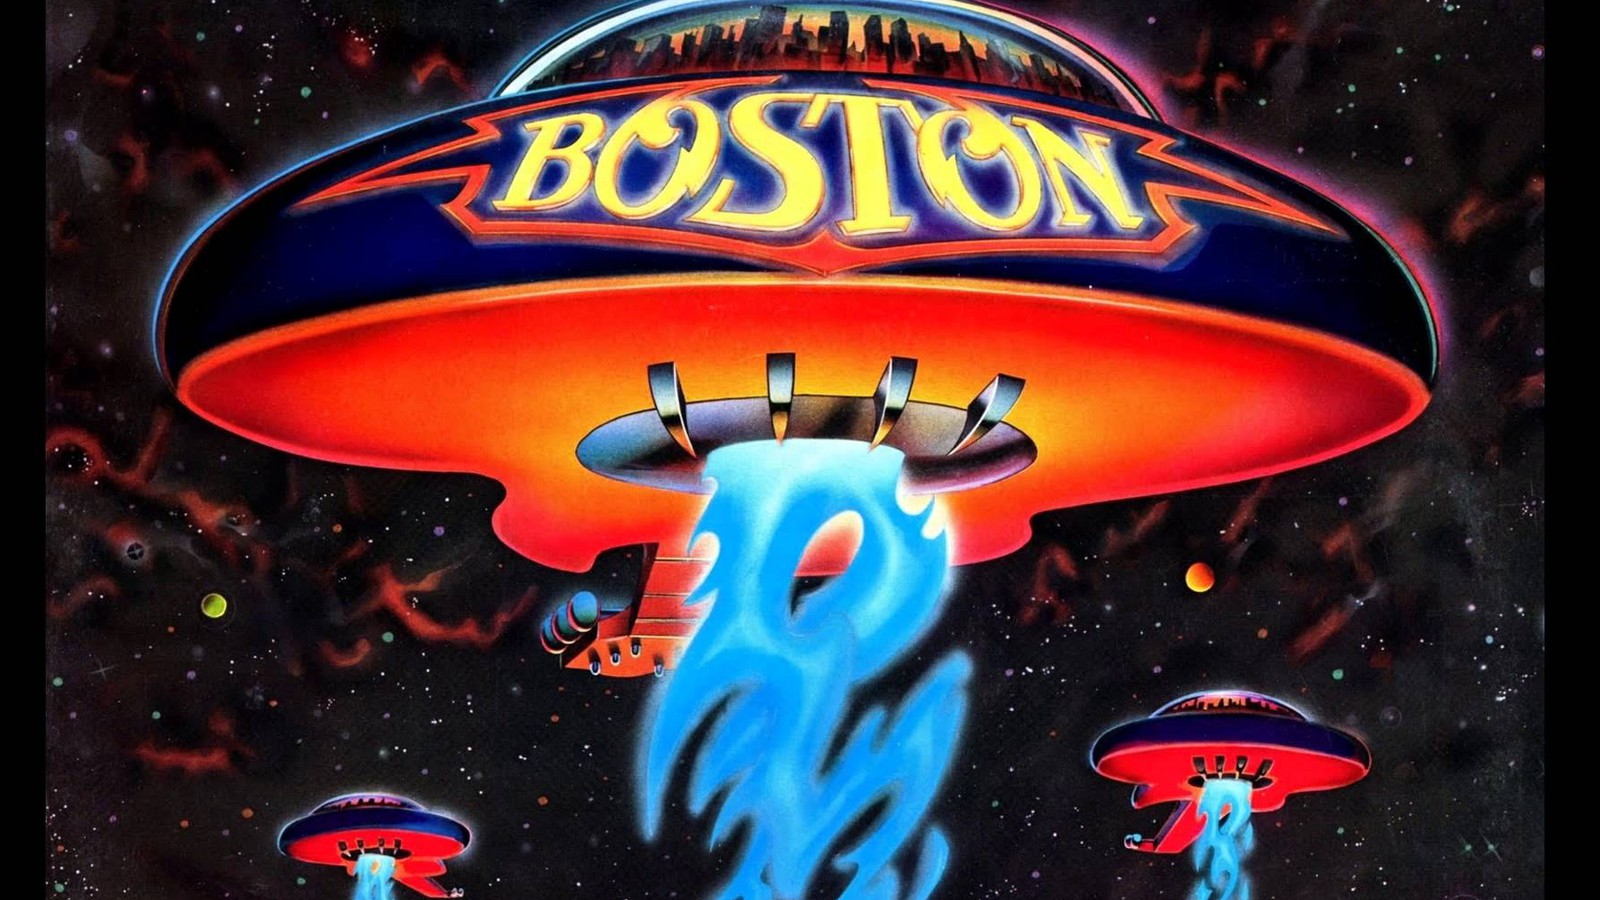 More Than a Feeling': Behind the Design of Boston's 1976 Album